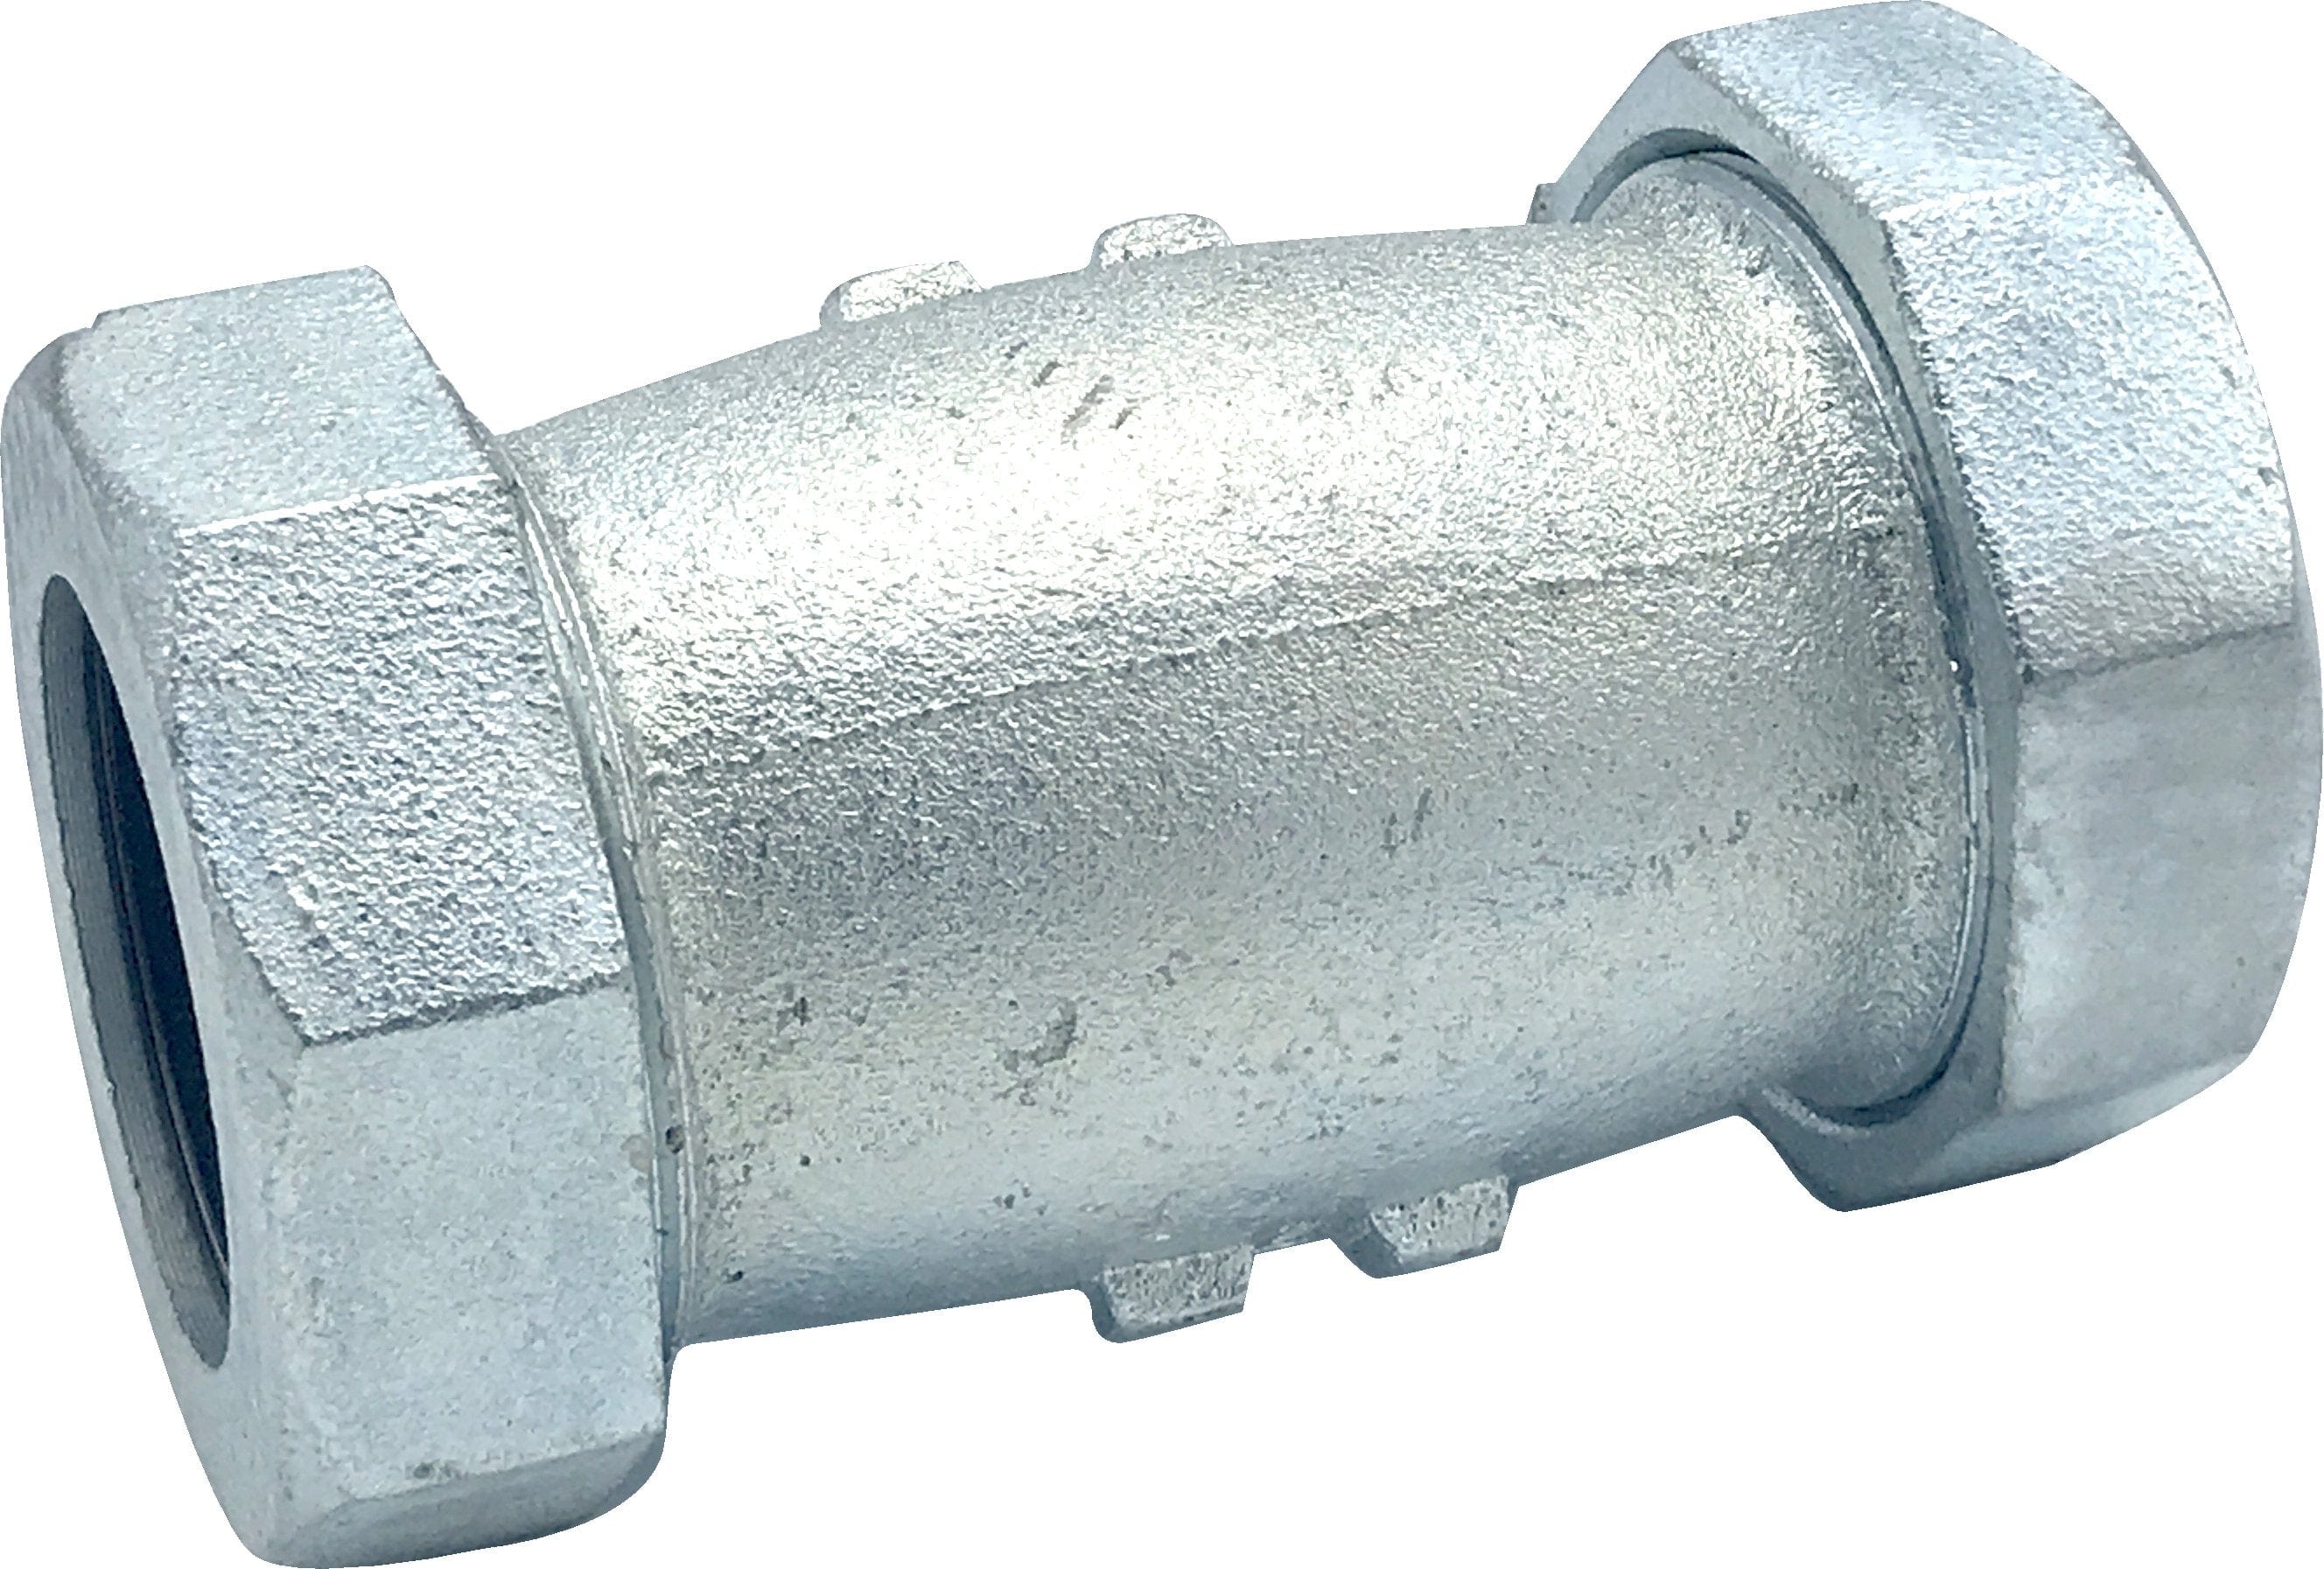 3" Long Galvanized Compression Coupling